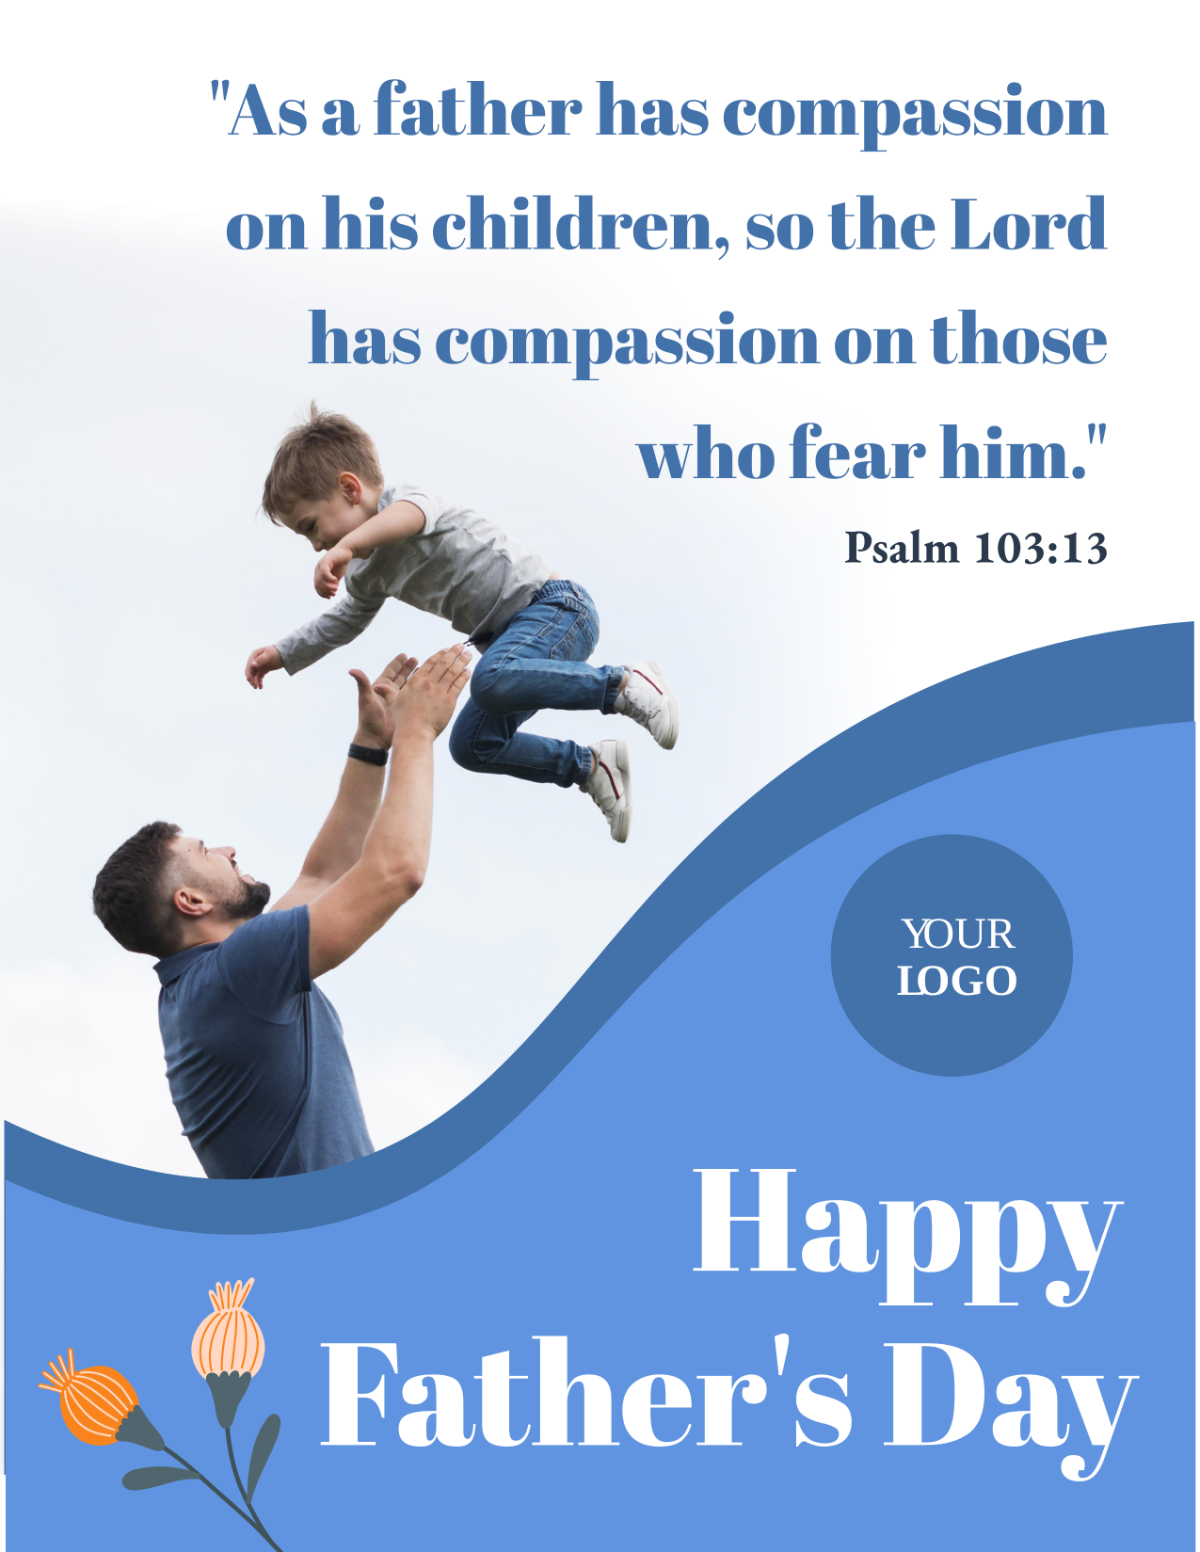 Father's Day Church Flyer